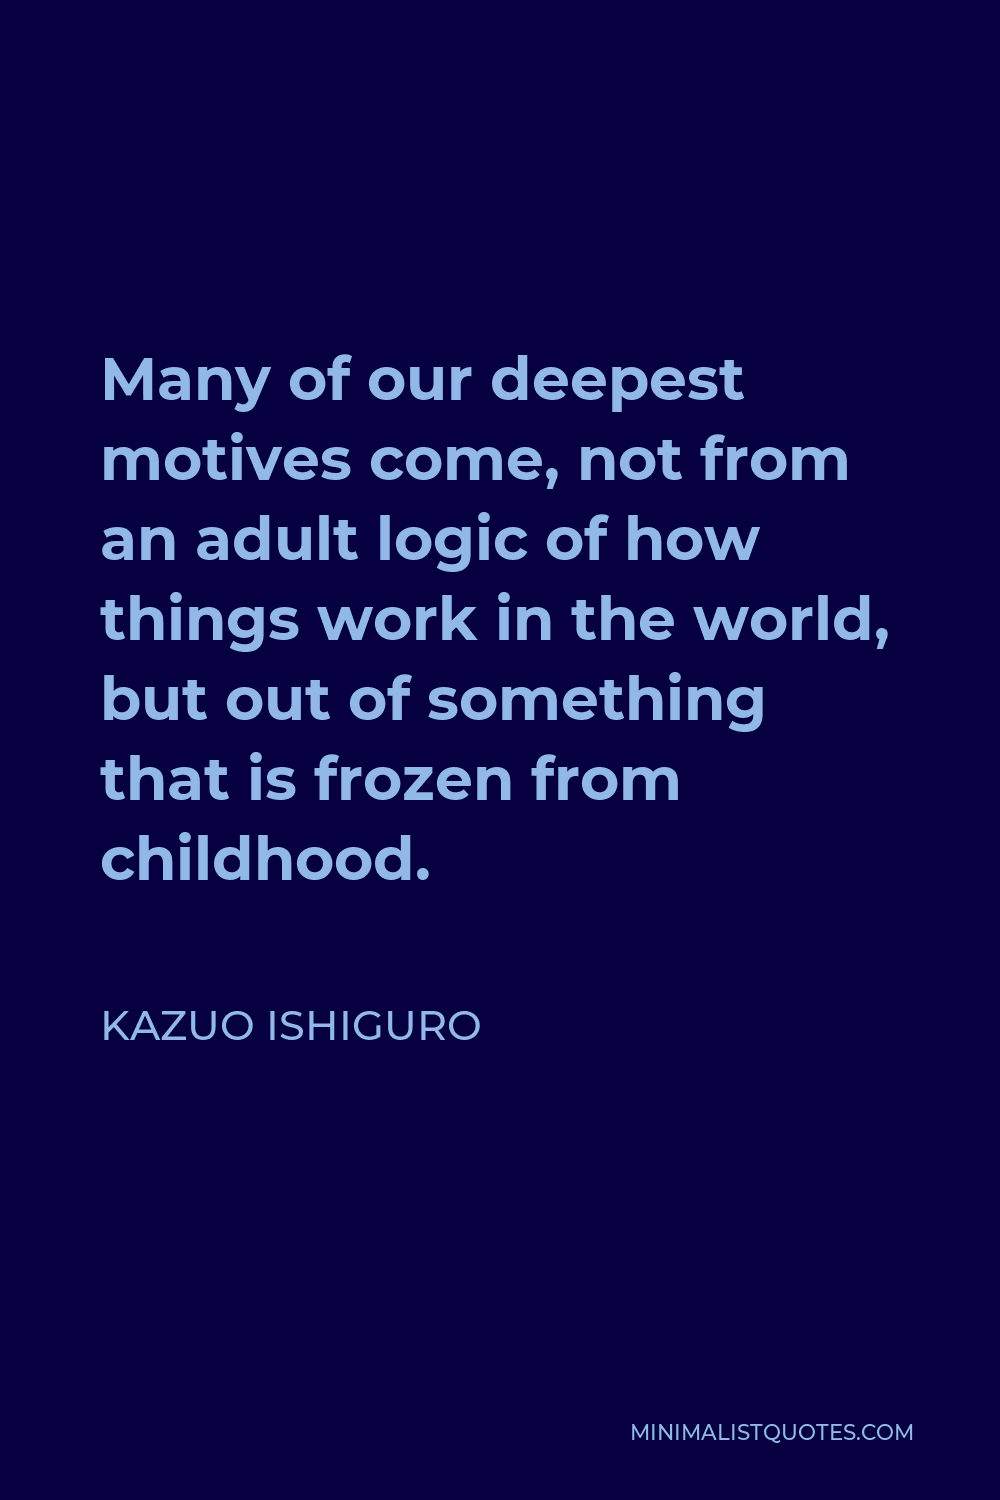 Kazuo Ishiguro Quote - Many of our deepest motives come, not from an adult logic of how things work in the world, but out of something that is frozen from childhood.